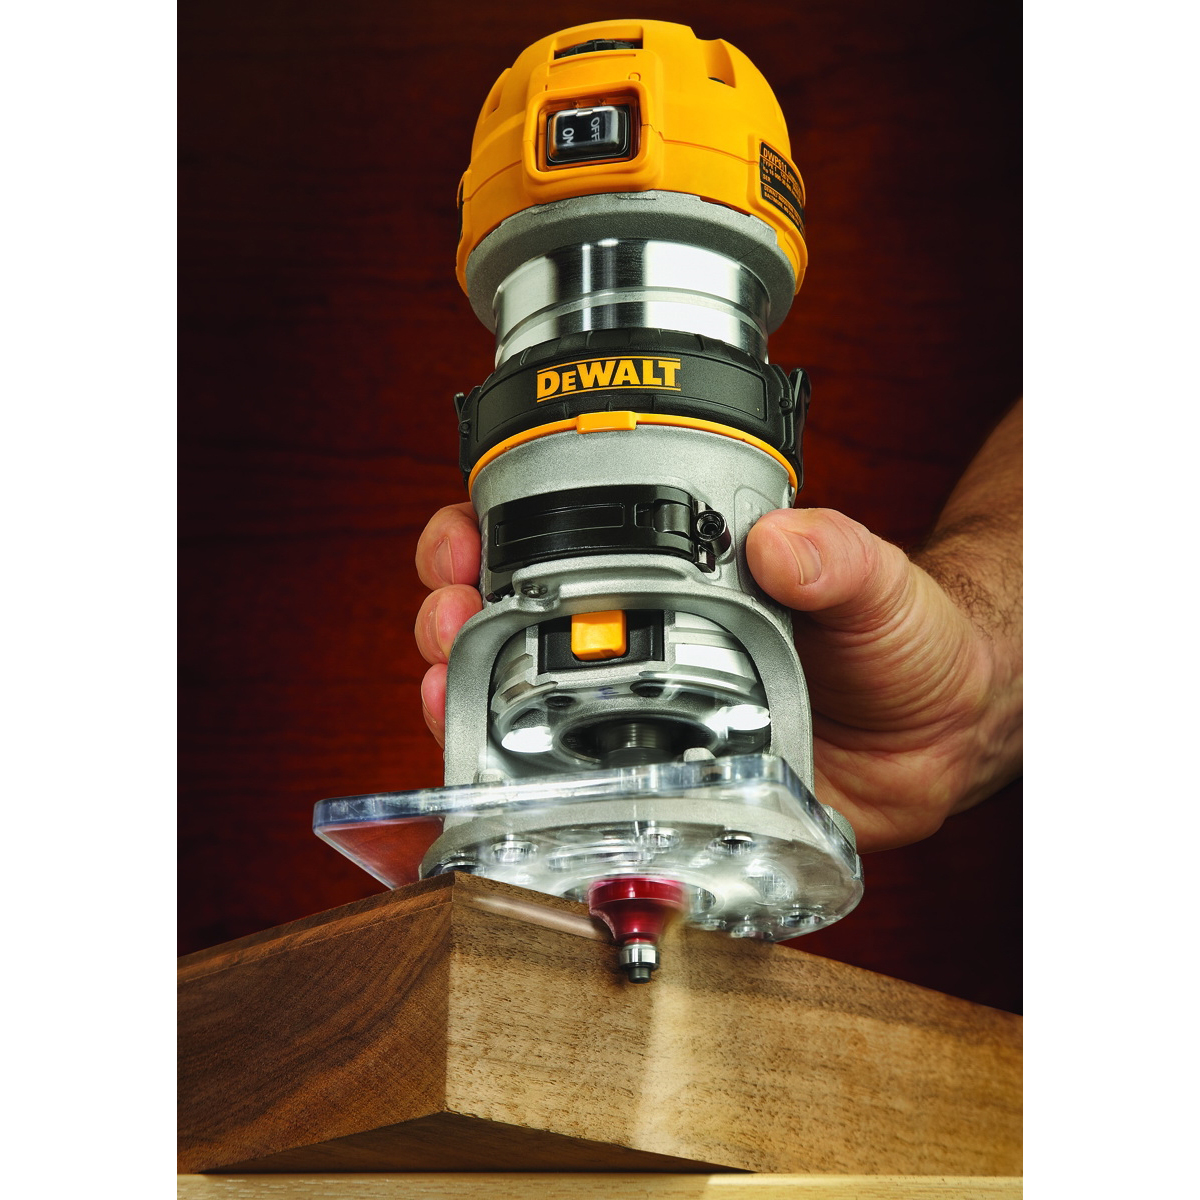 DeWALT DWP611 Compact Router with LED, 7 A, 16,000 to 27,000 rpm Load Speed, 1-1/2 in Max Stroke - 4